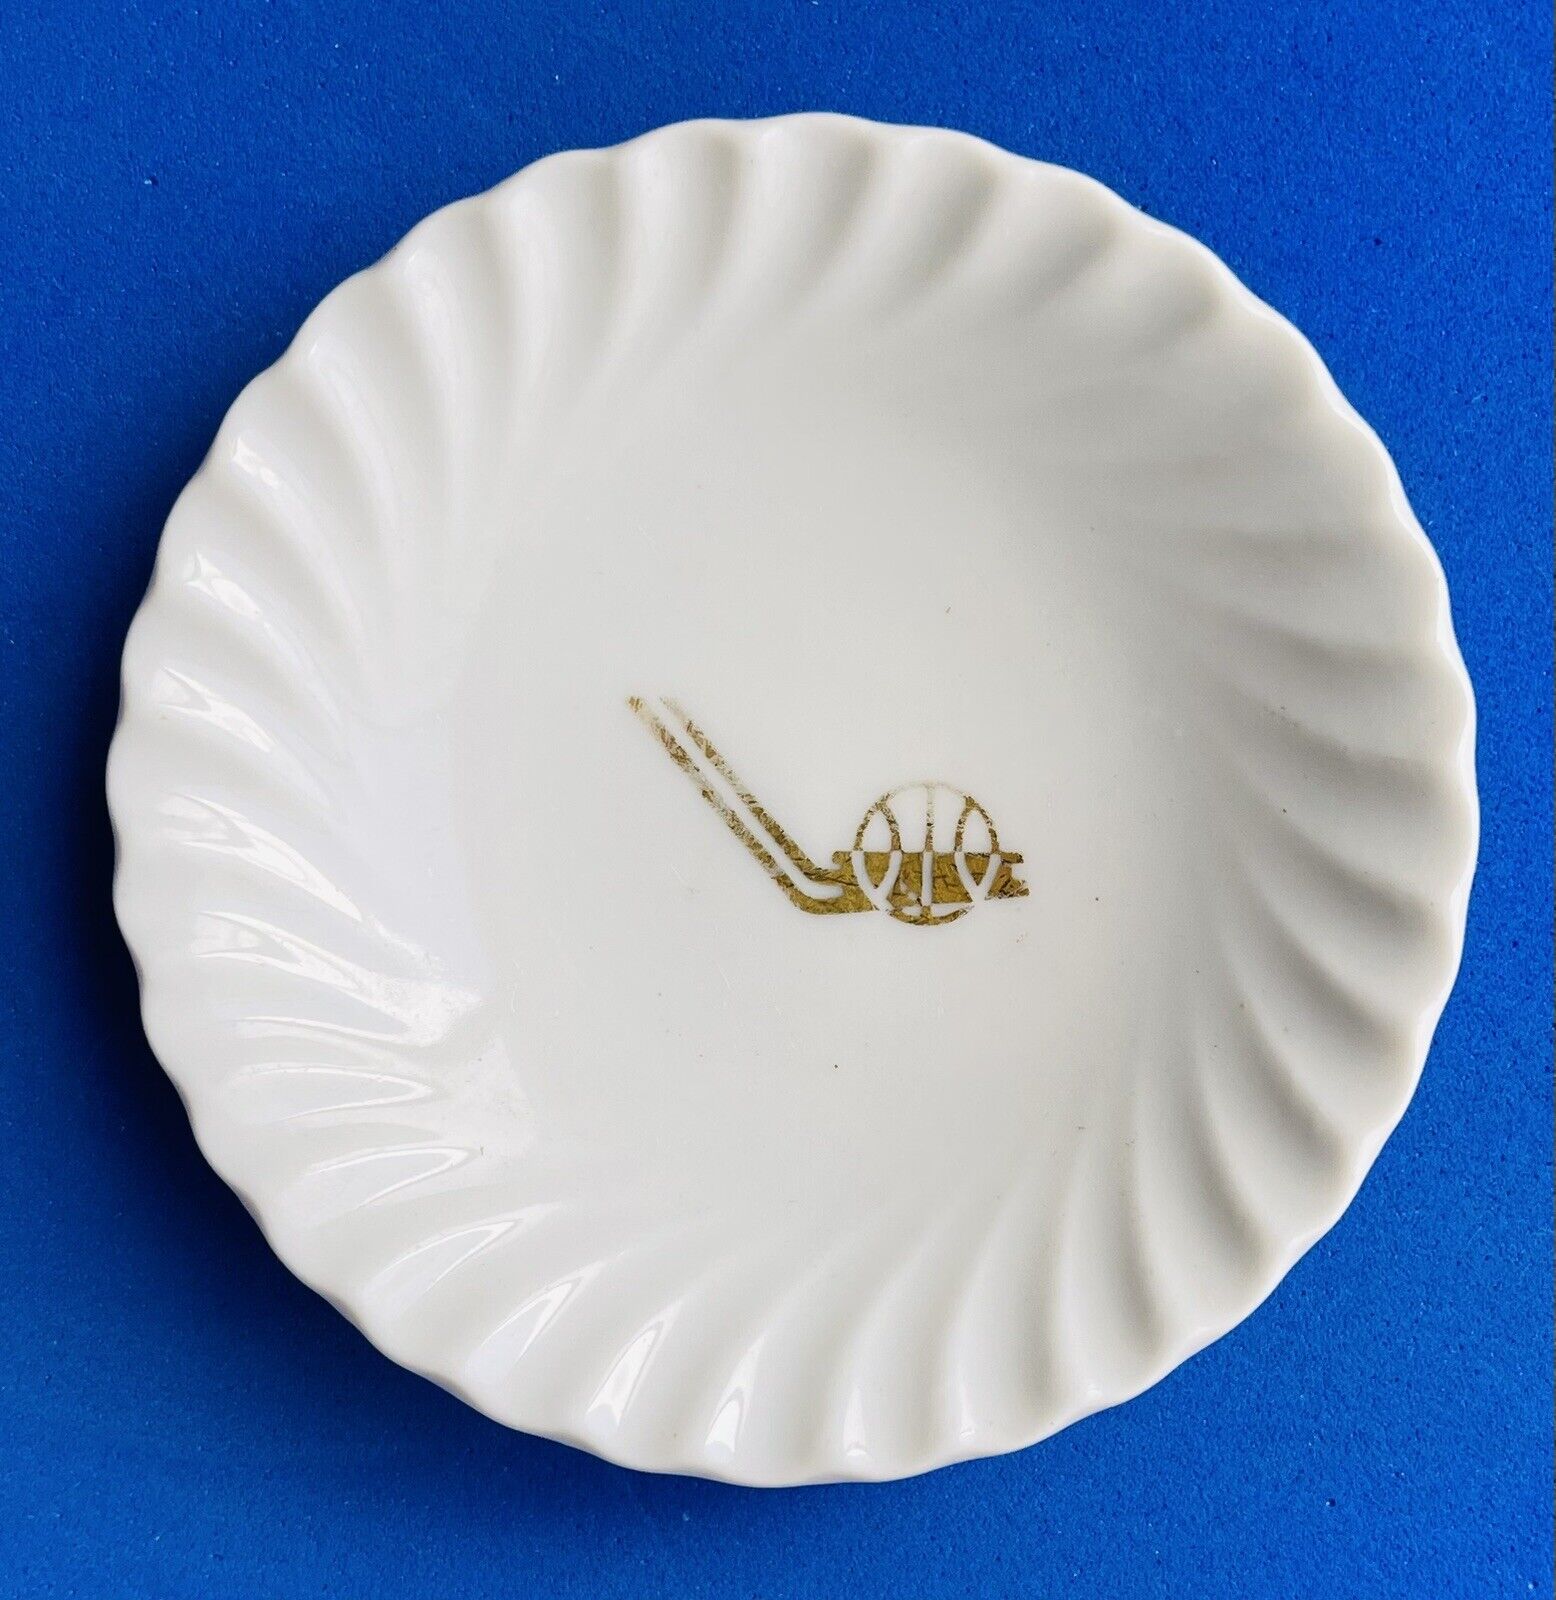 Air Afrique Airlines Small White Ashtray - by Chatre & Cher